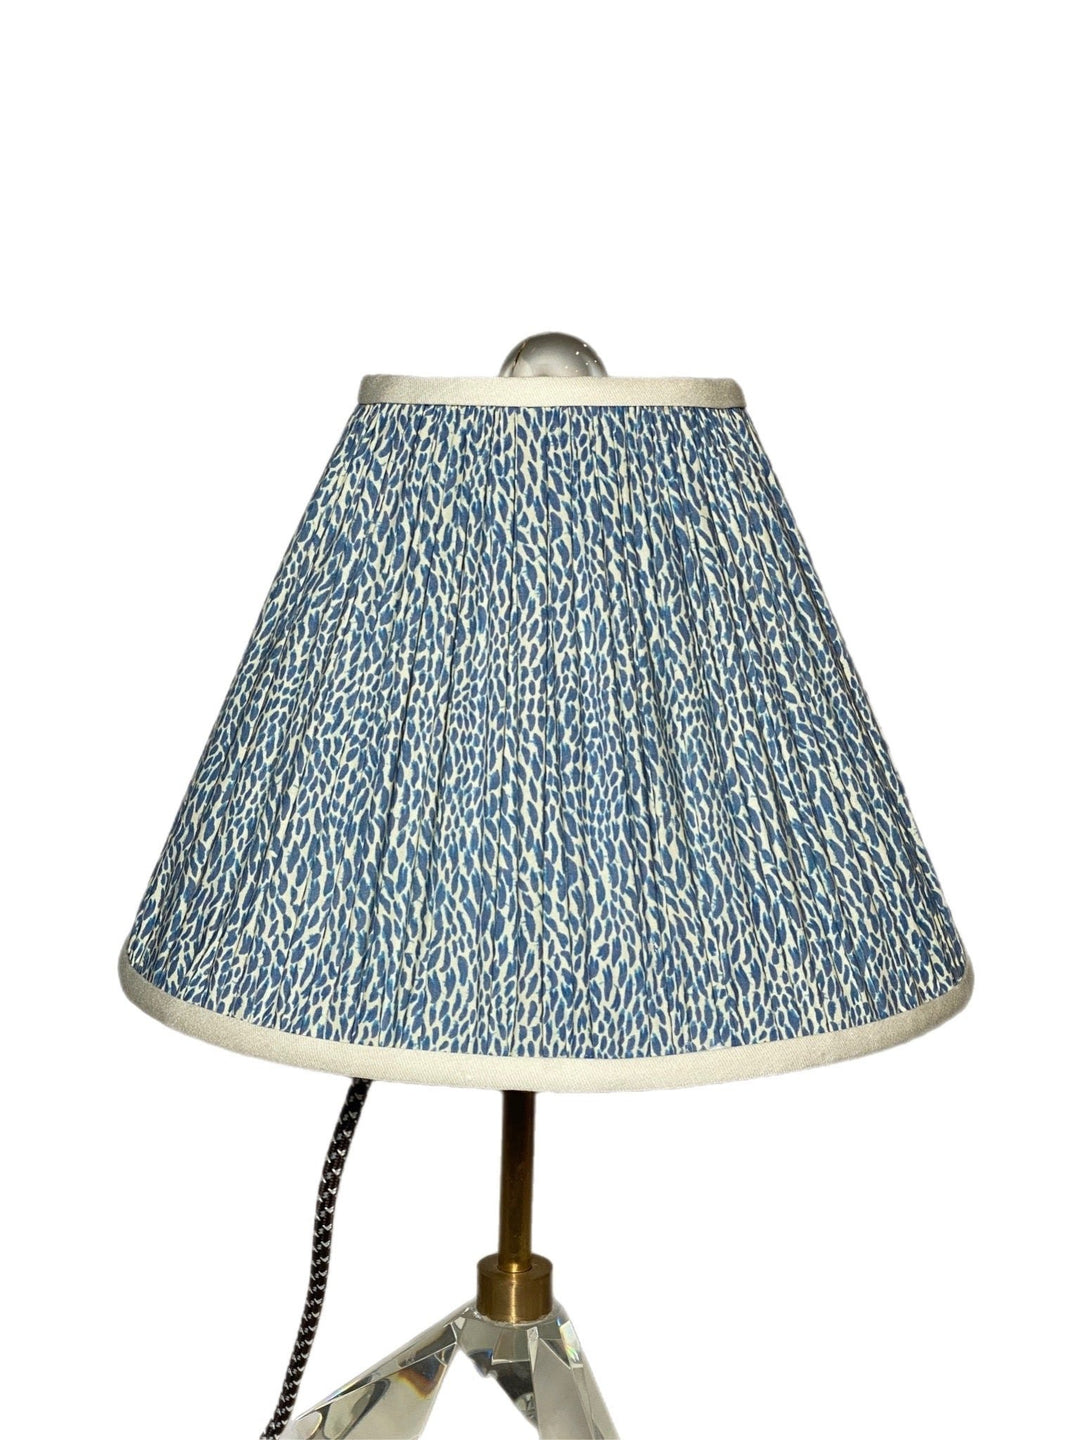 Gathered Shade made with Plumettes by Pierre Frey 12" Base (1) in stock - Lux Lamp Shades